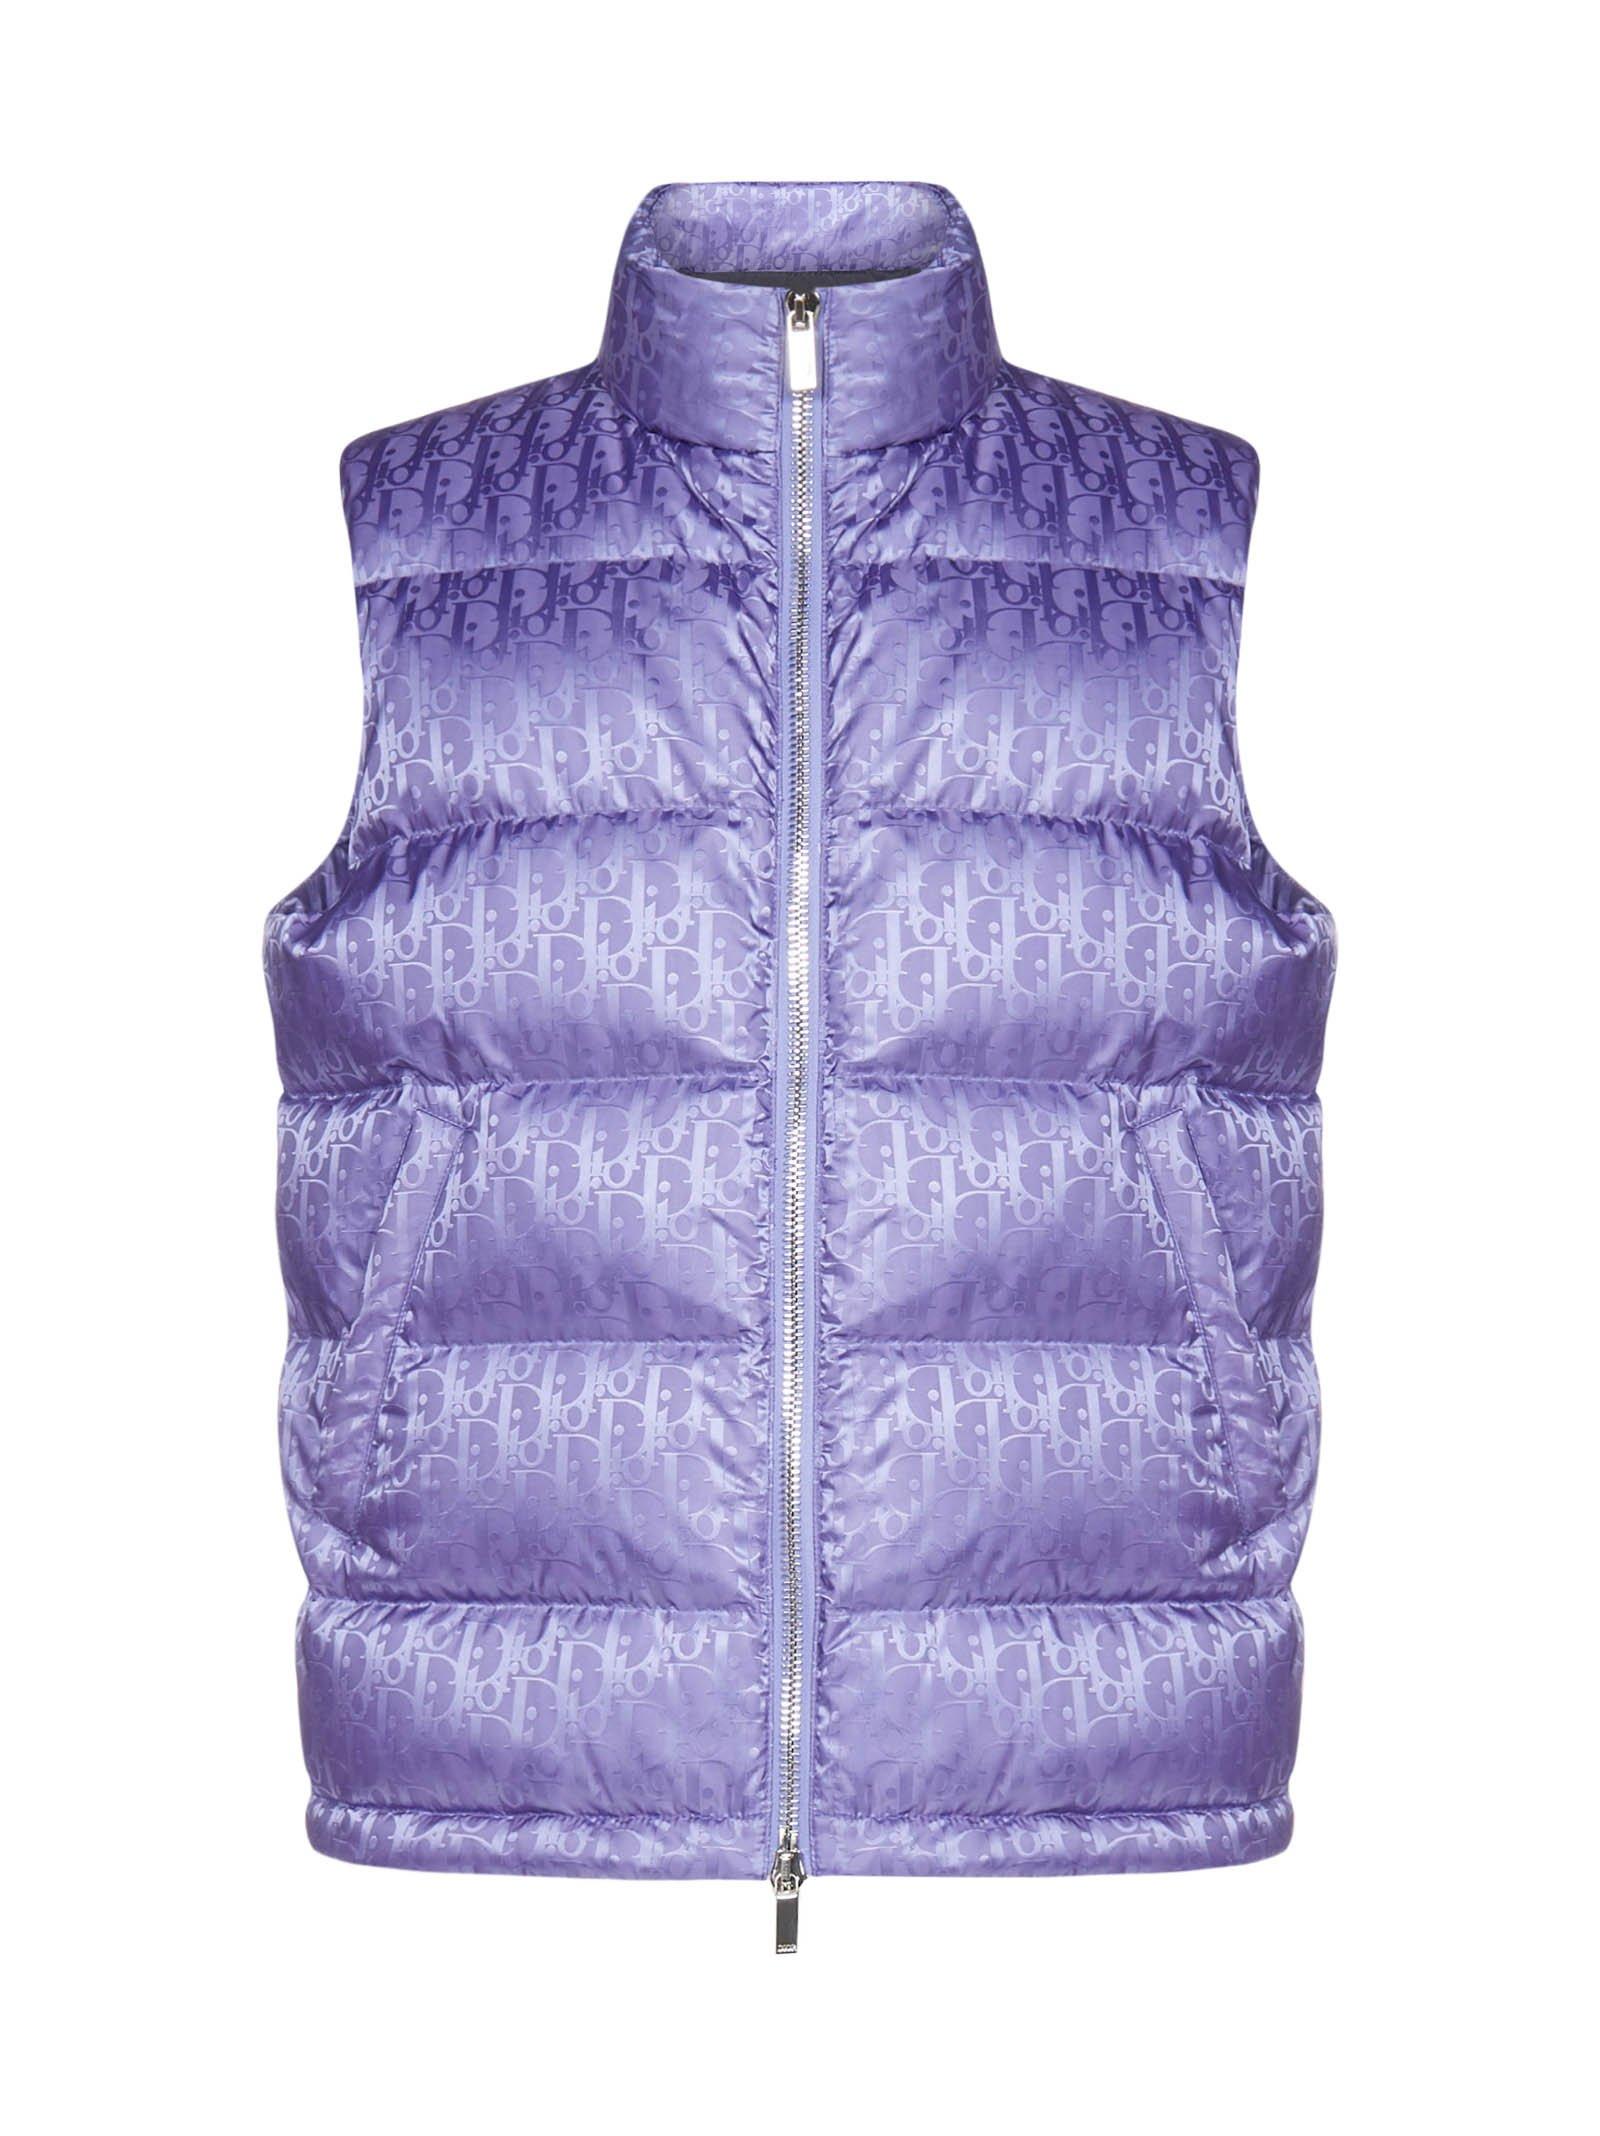 Dior All-over Dior Oblique Jacquard Motif Sleeveless Down Jacket in Purple  for Men | Lyst